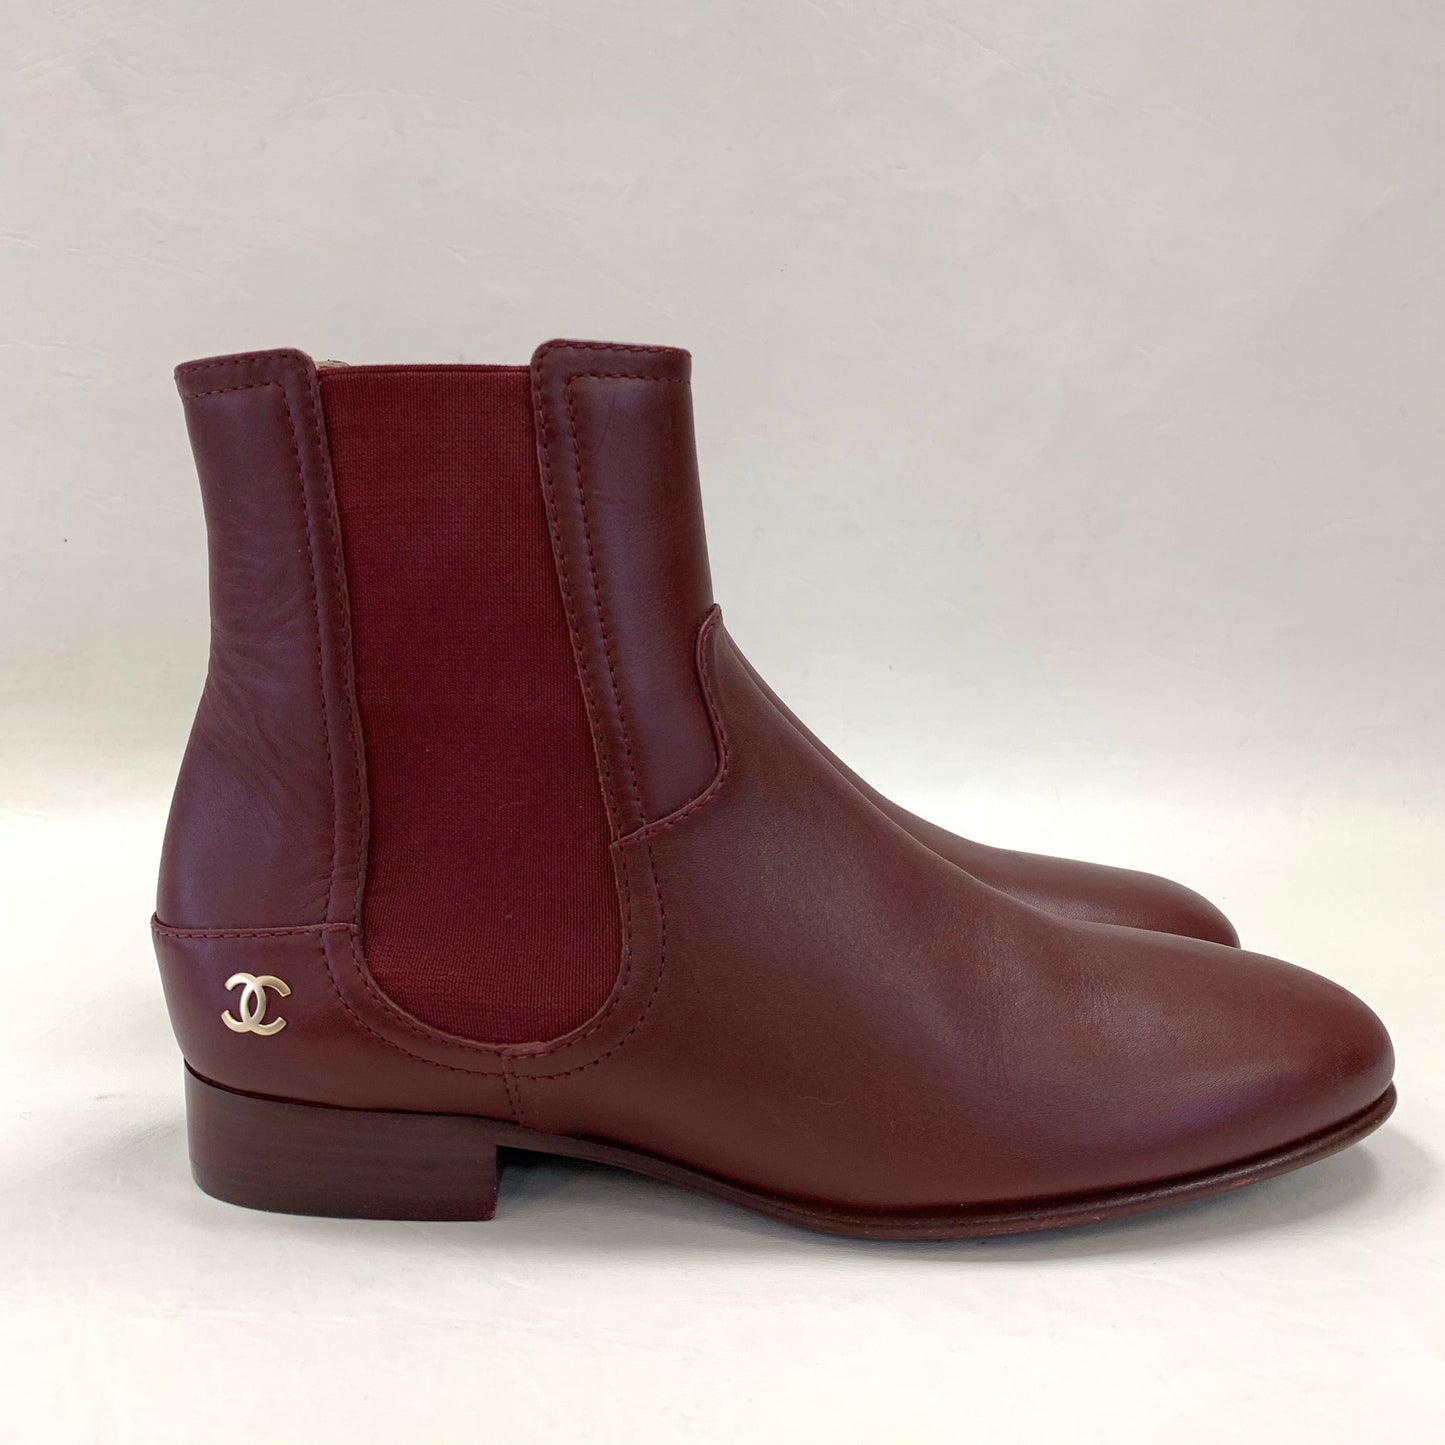 Authentic Chanel 16A Burgundy Leather Booties